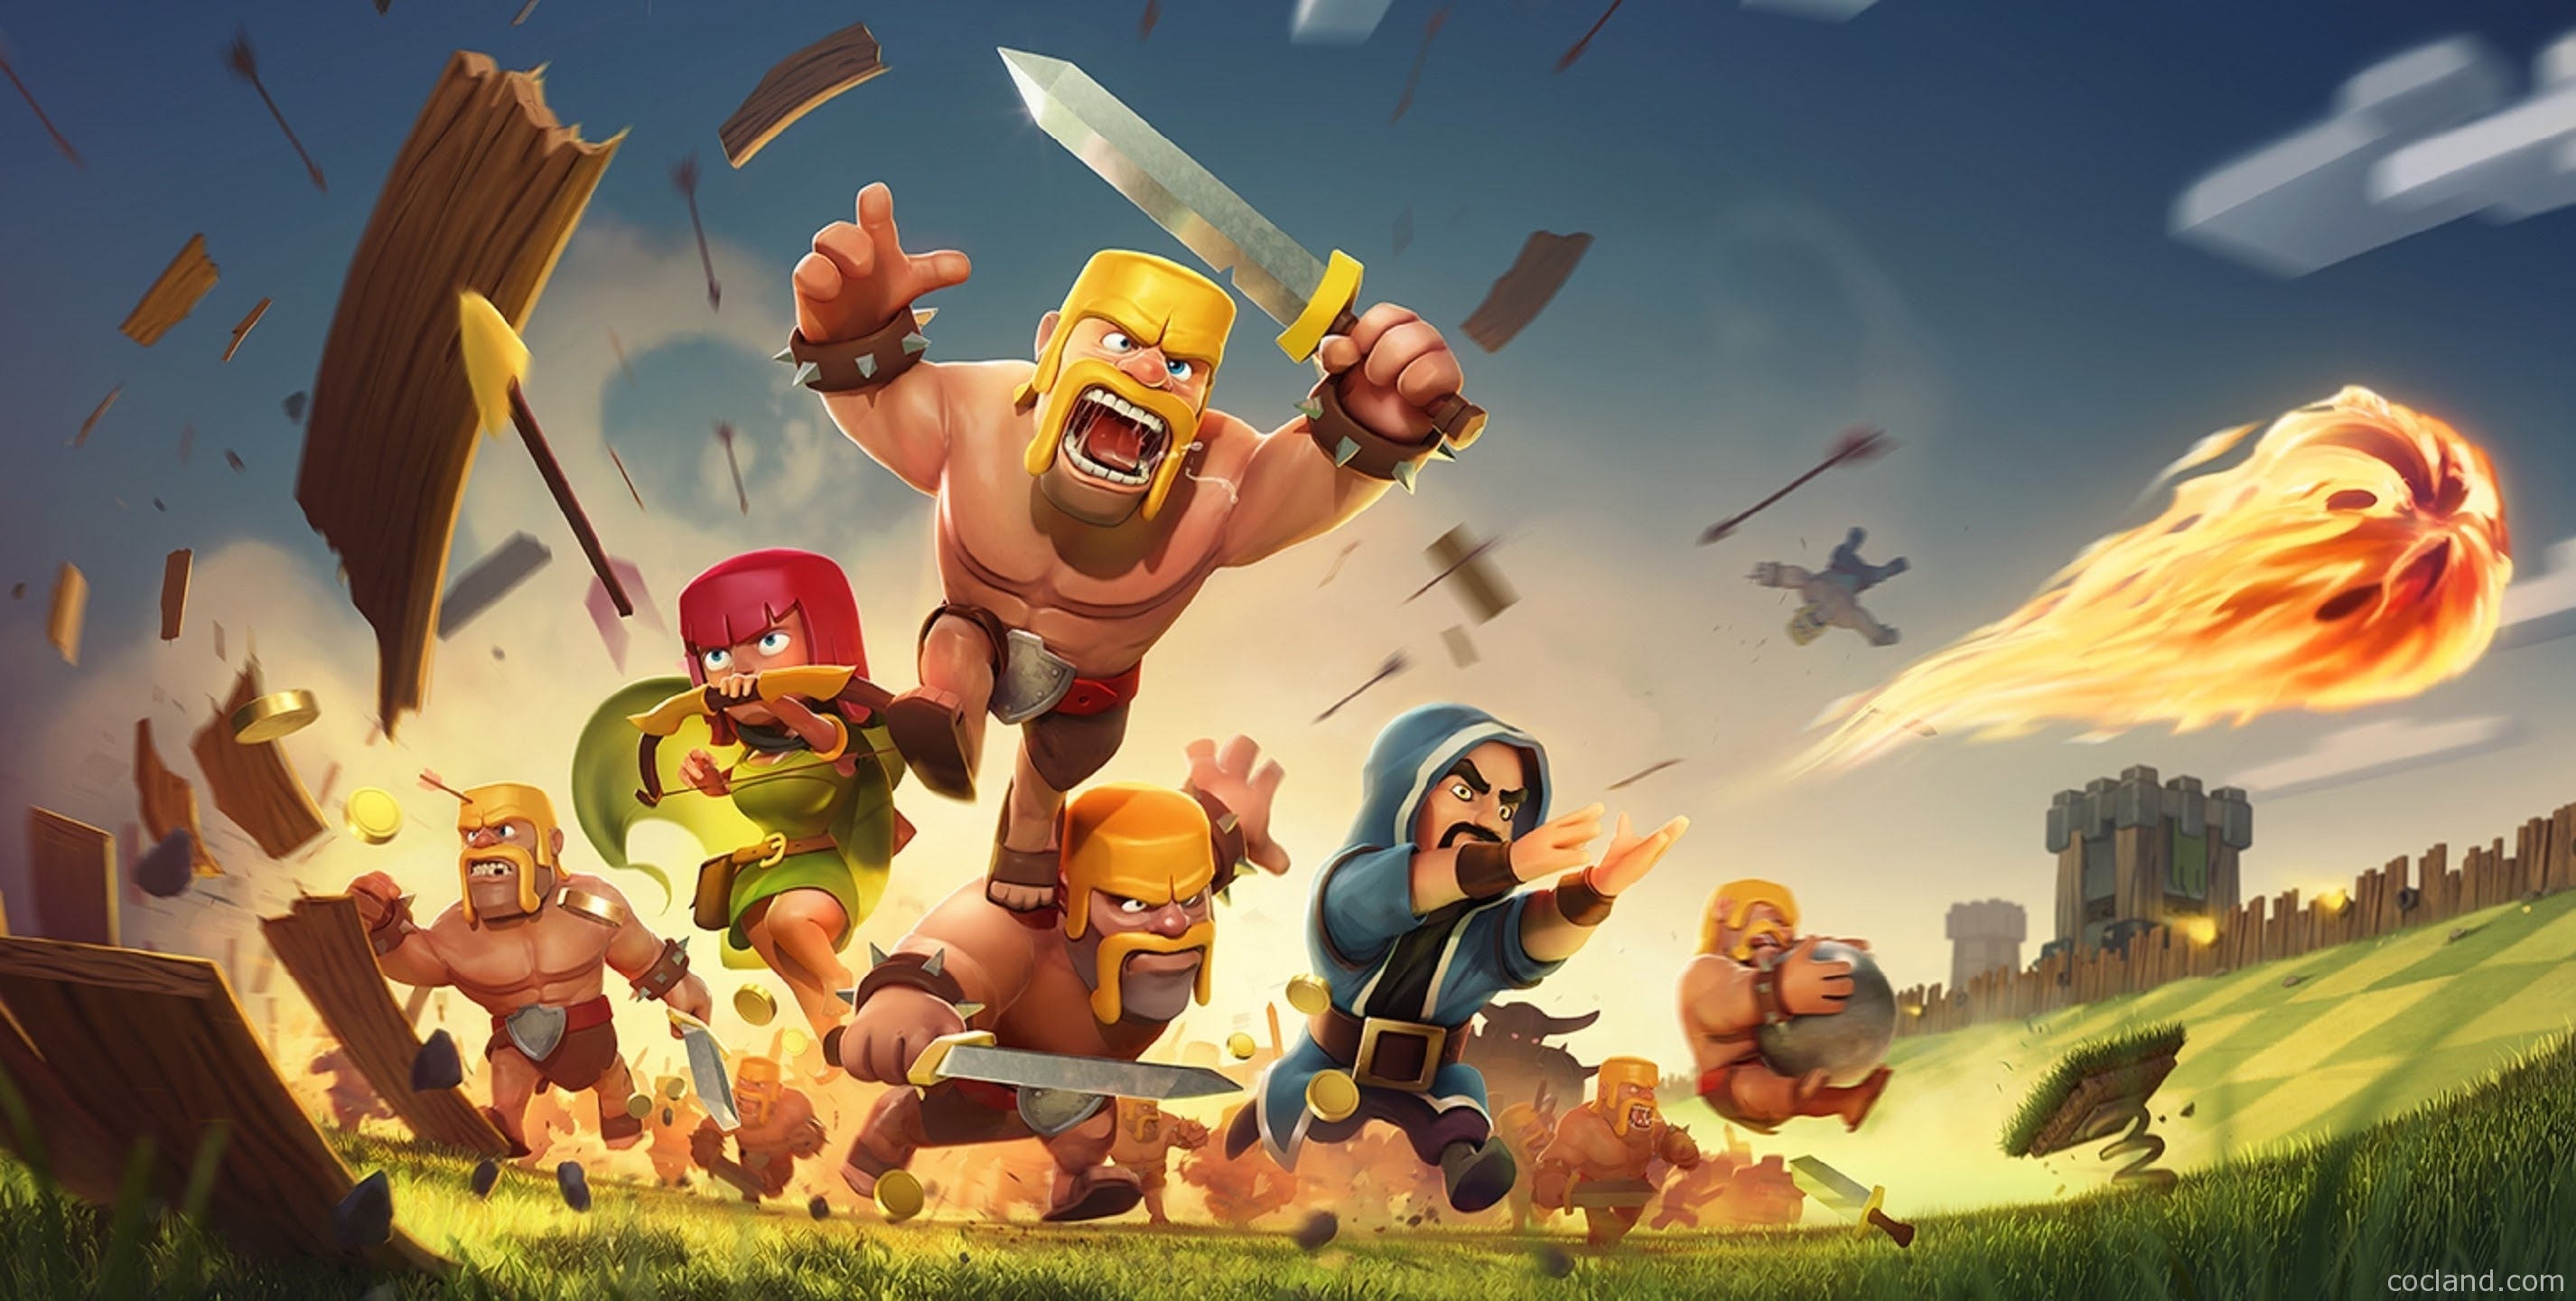 10 Top Clash Of Clan Images Hd FULL HD 1080p For PC Background